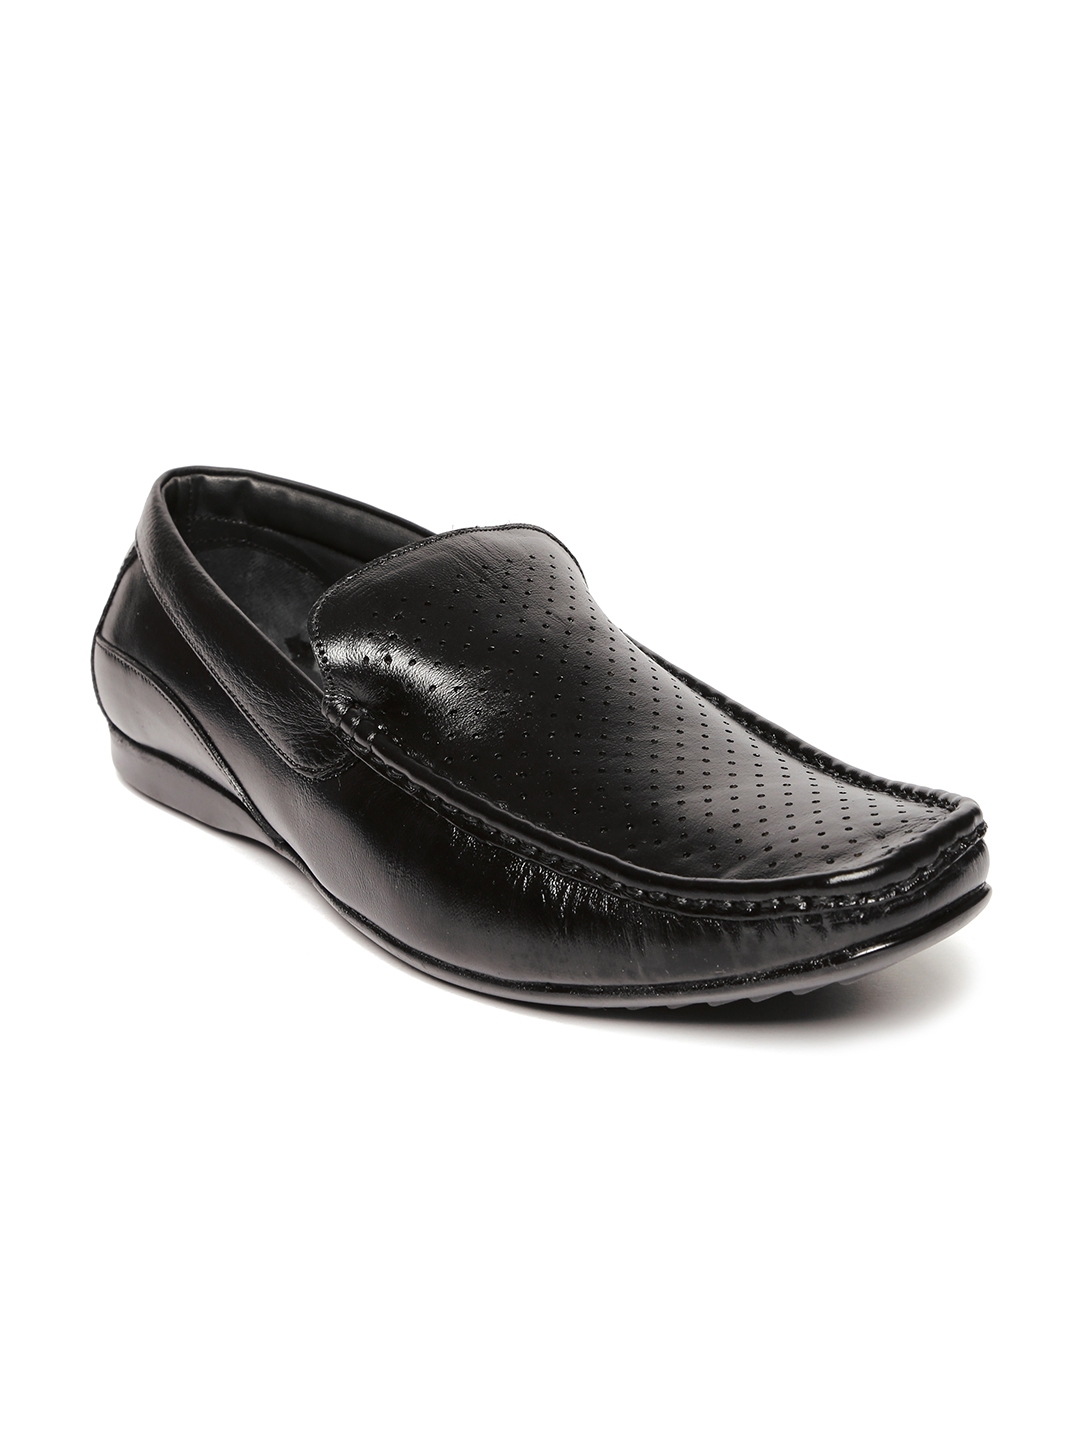 Buy Giorgio Men Black Loafers - Casual Shoes for Men 1396770 | Myntra